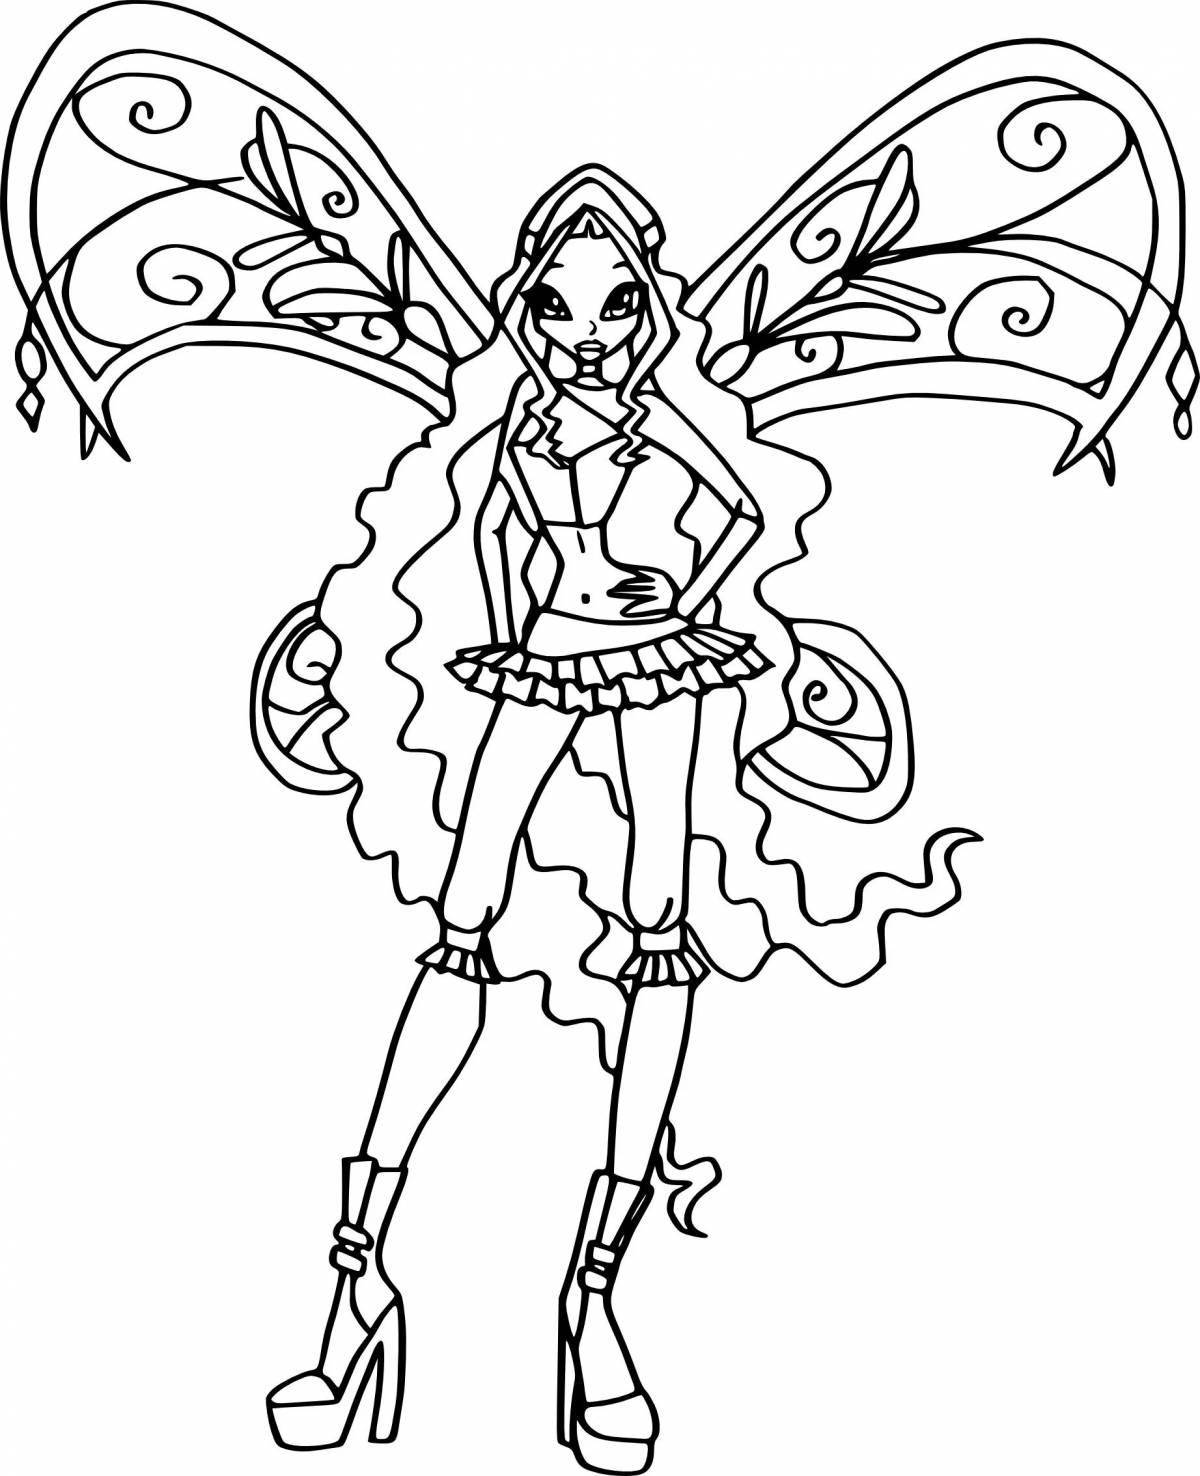 Colorful winx coloring page layla belivix